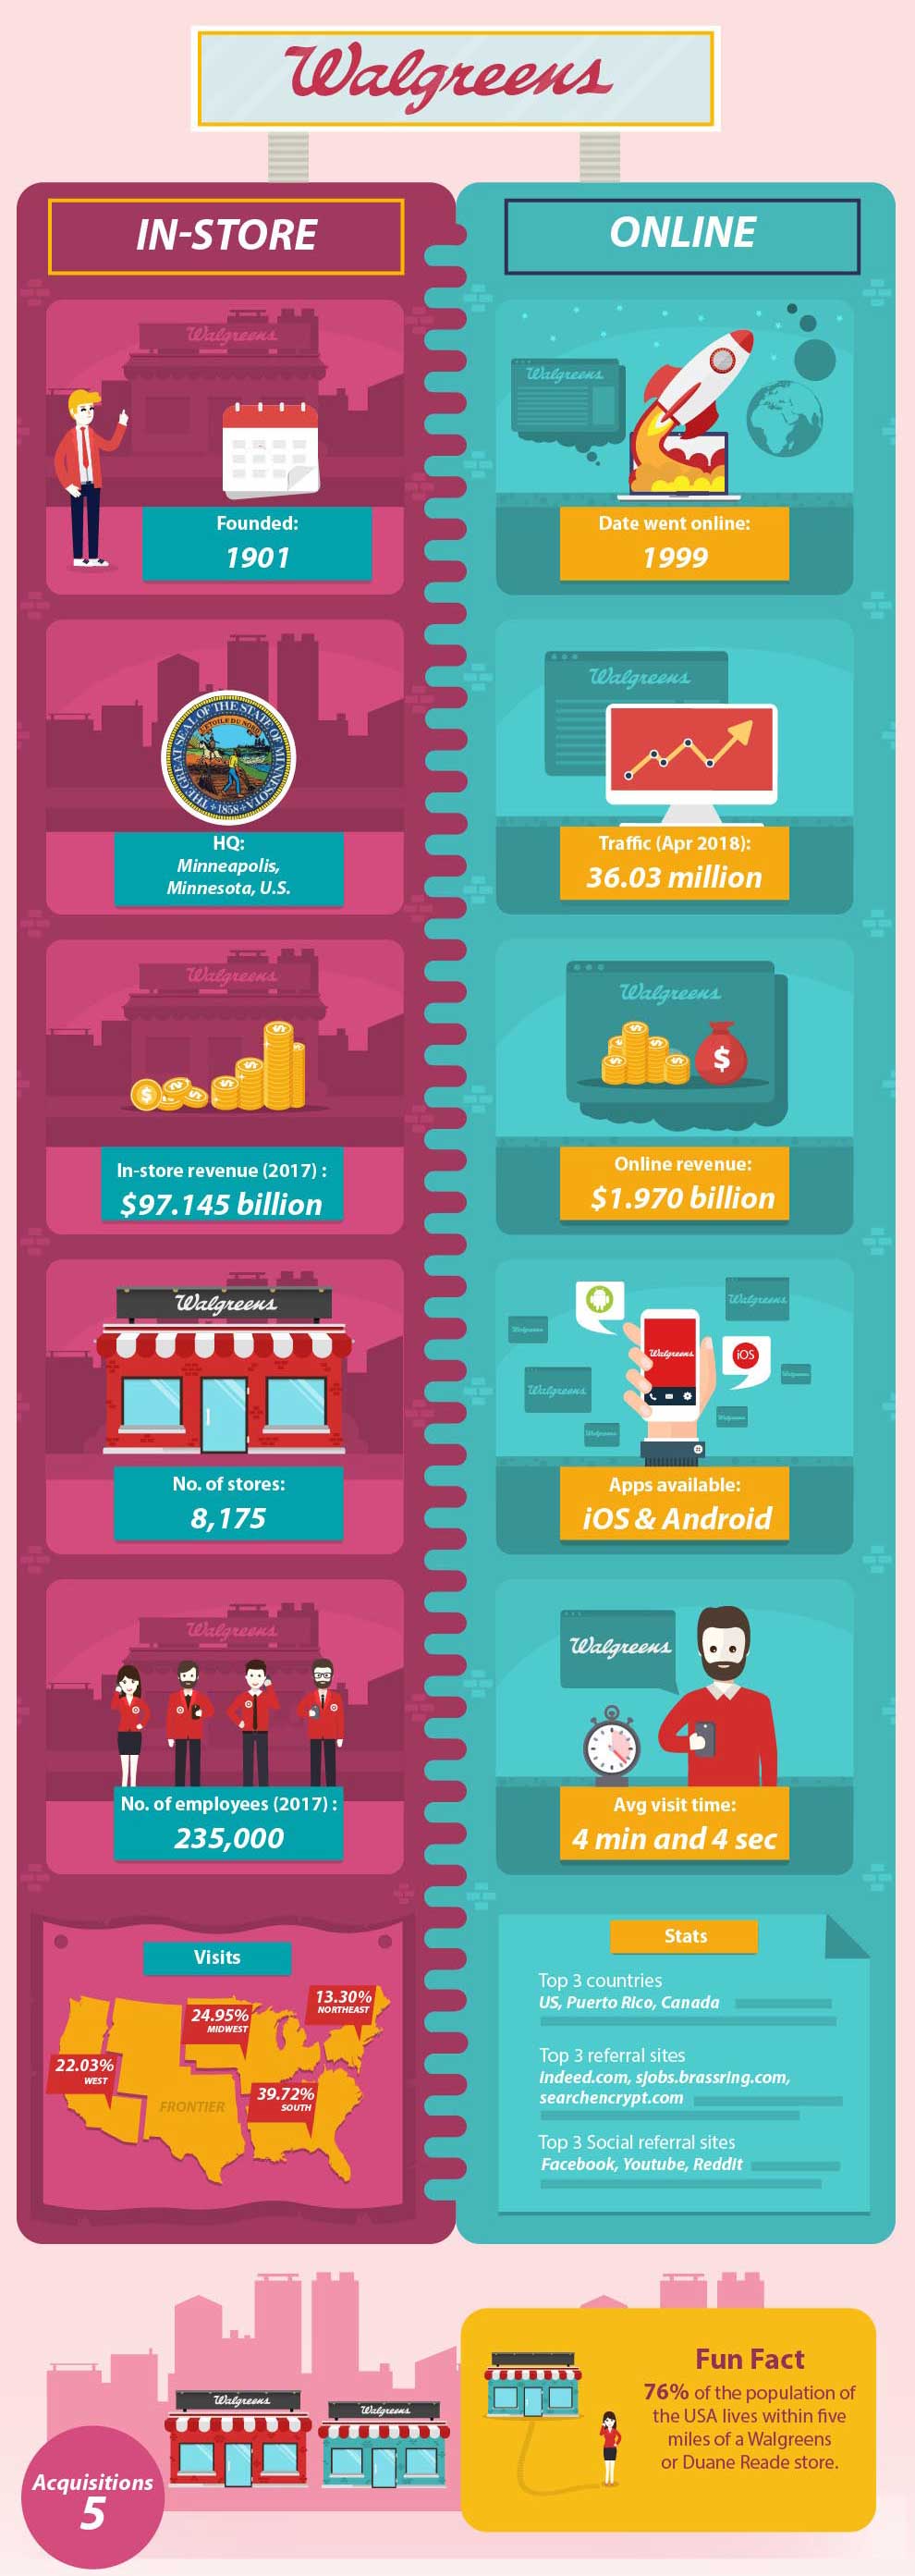 How E-commerce Compares to Regular Brick and Mortar Stores 